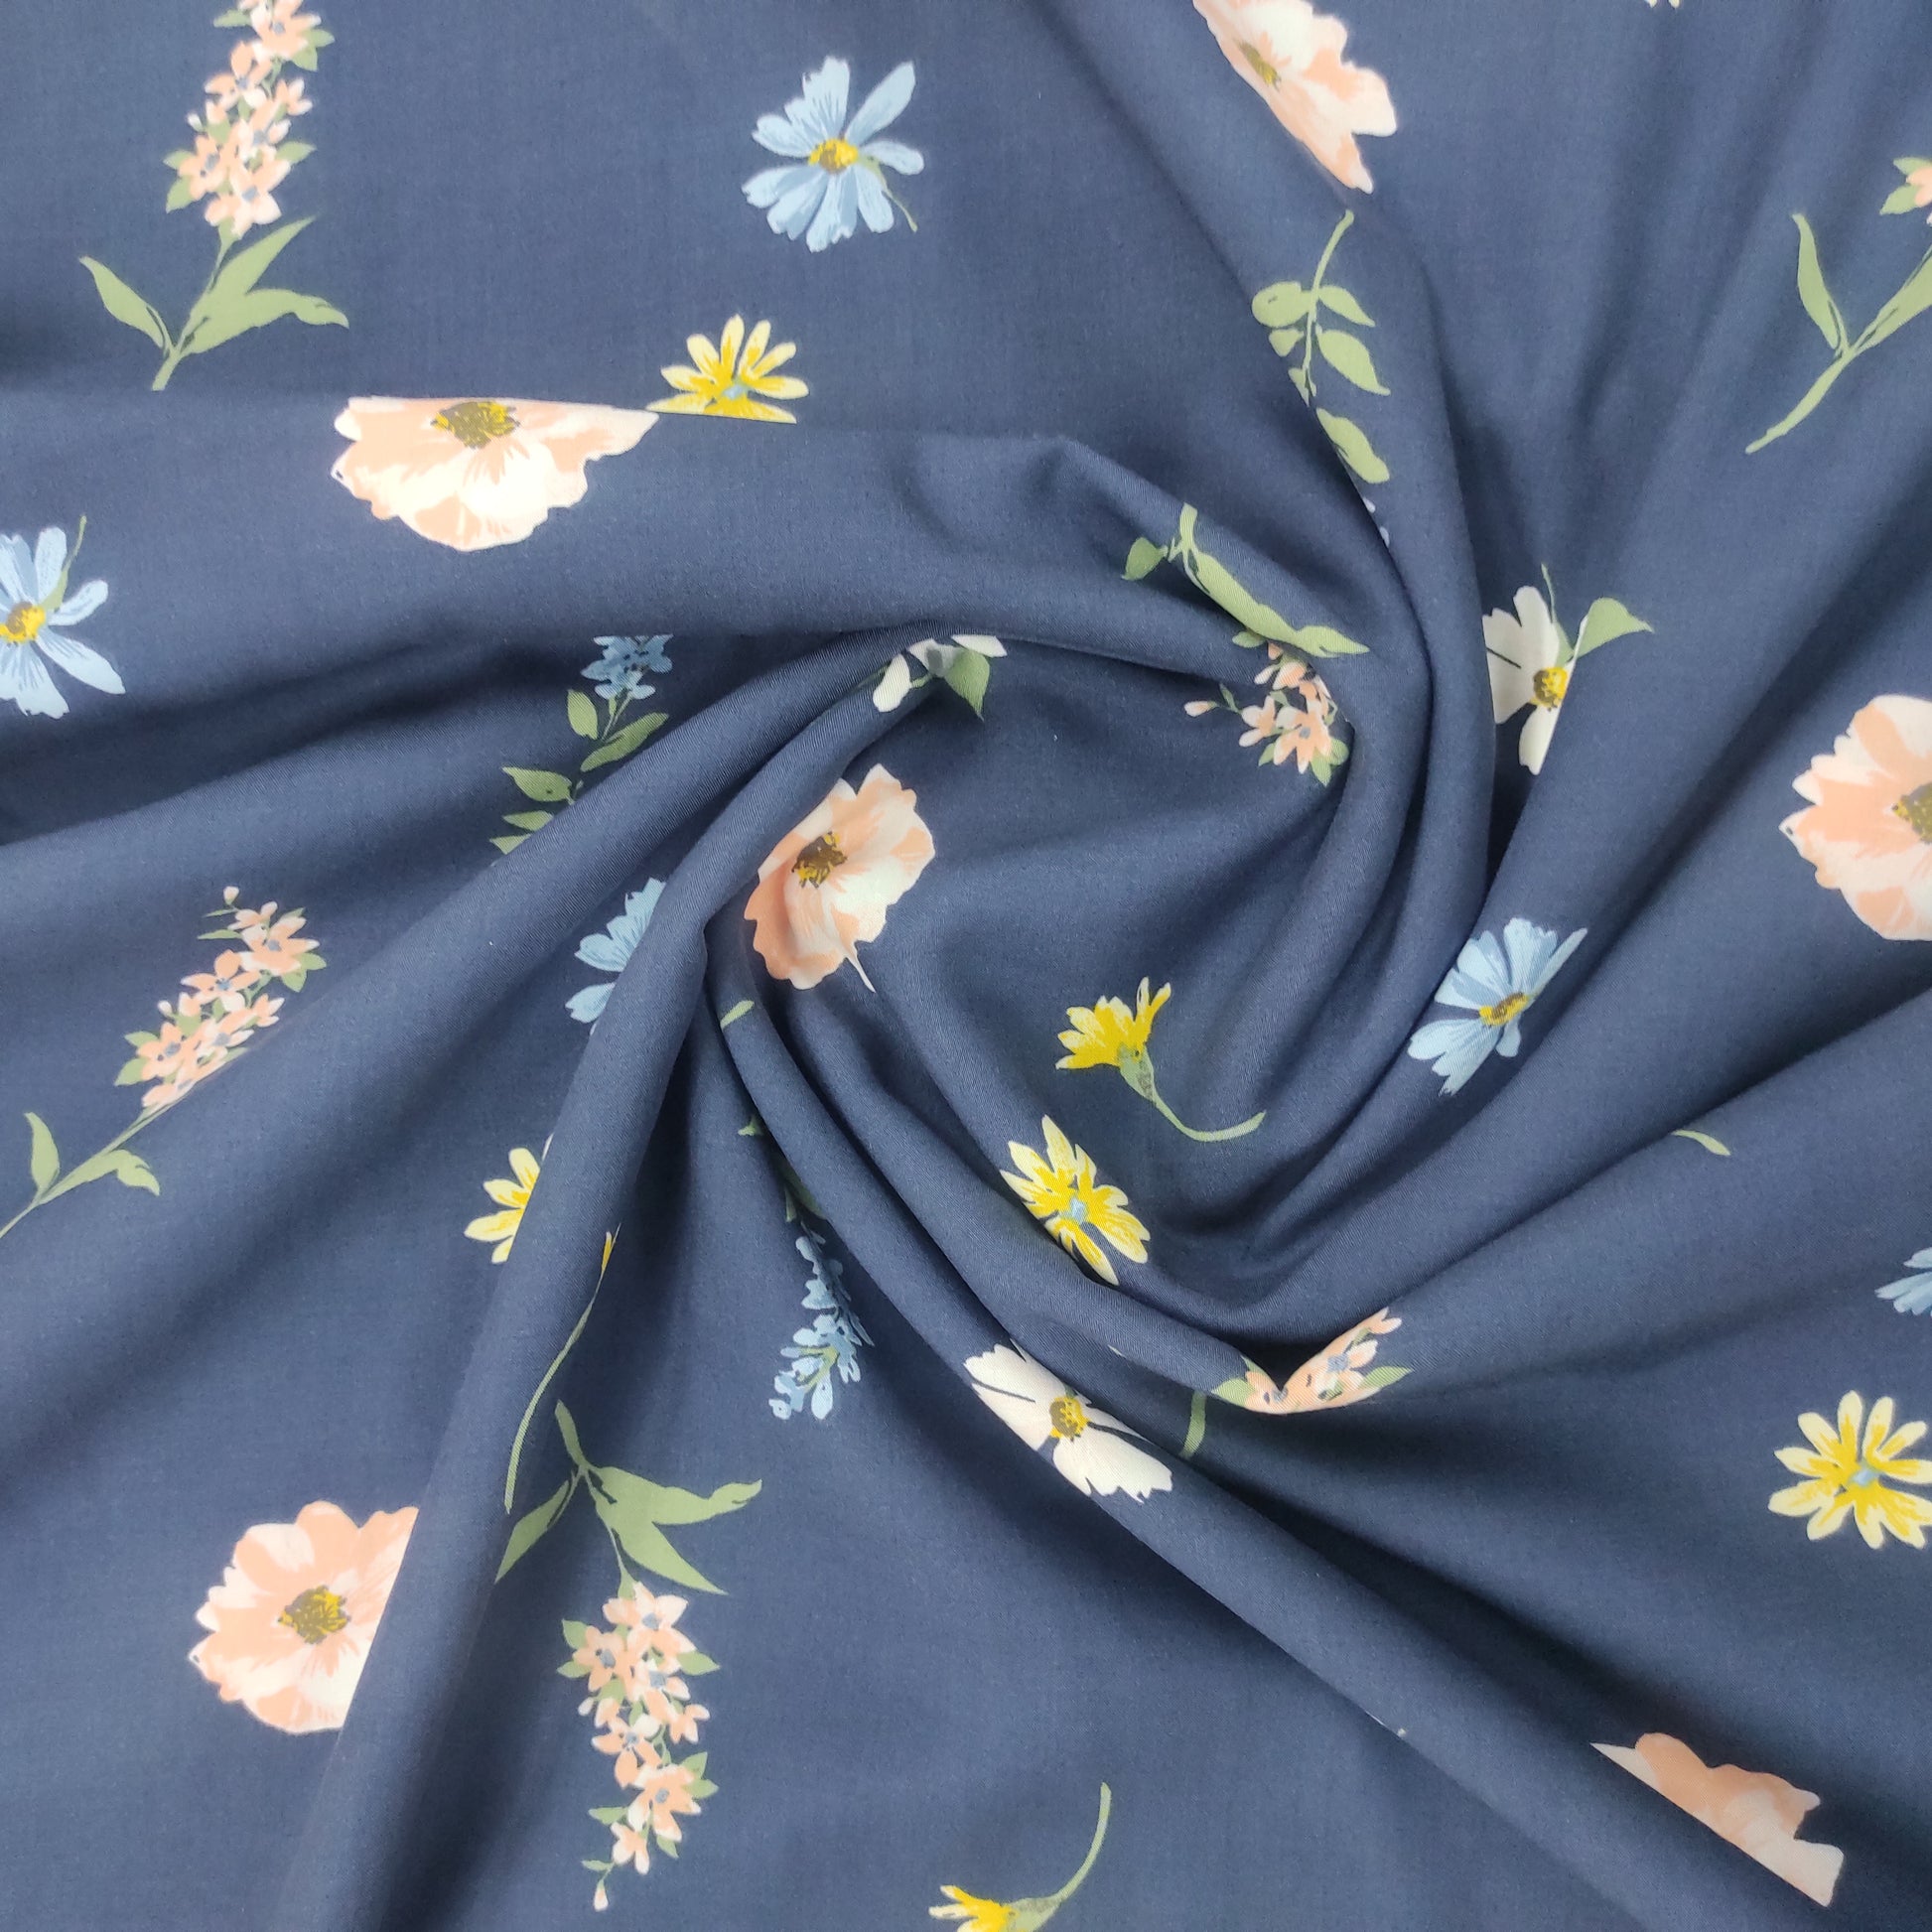 Buy Blue Floral Print Rayon Fabric Online India